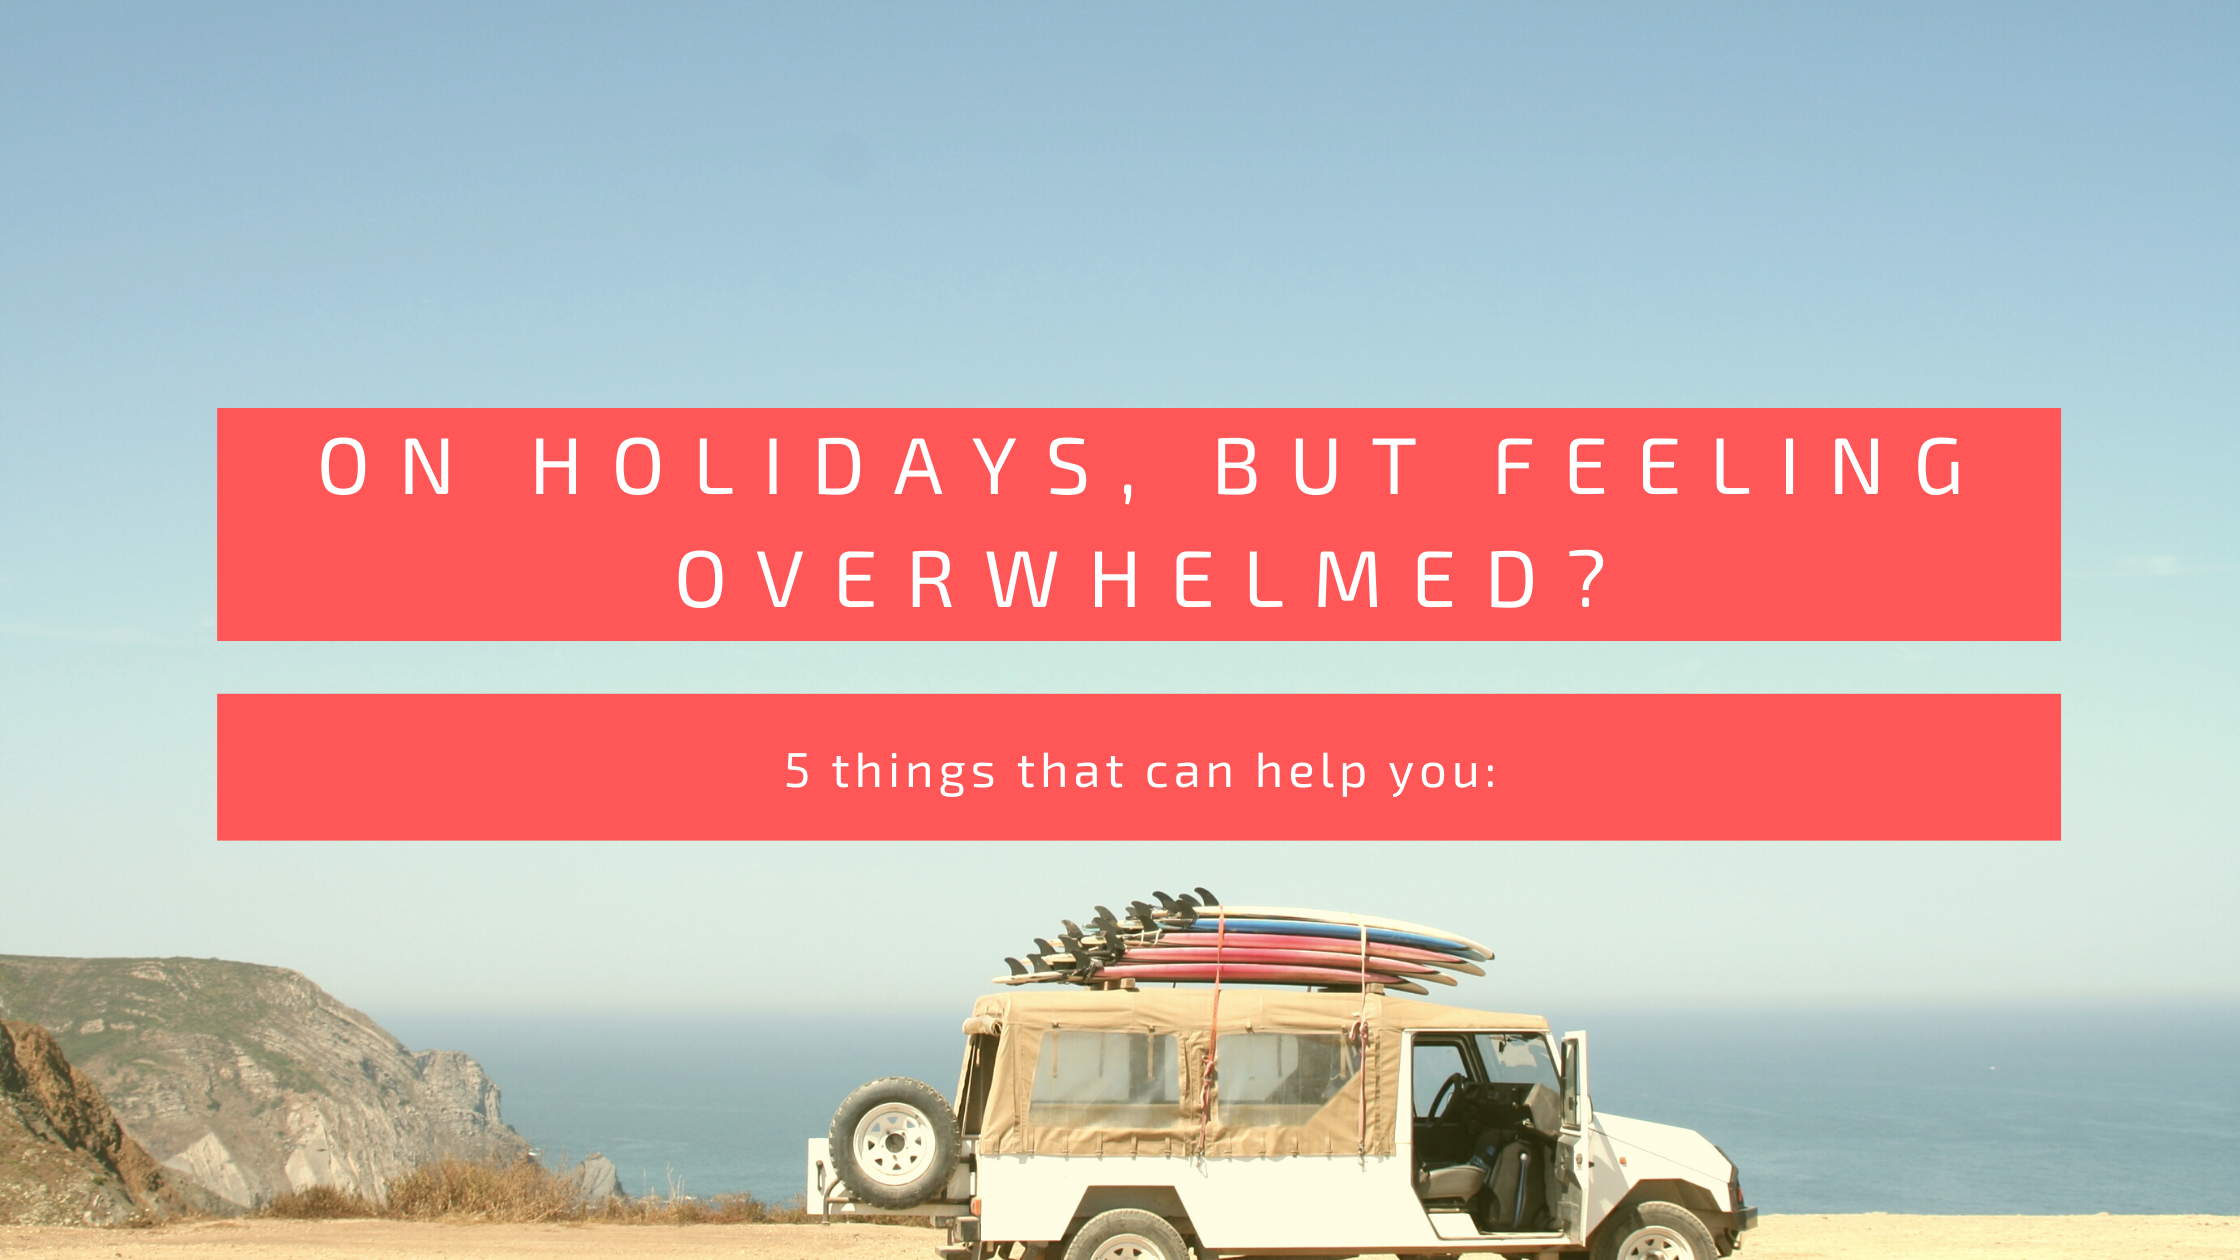 On holidays, but still feeling overwhelmed? 5 things that will bring calm: